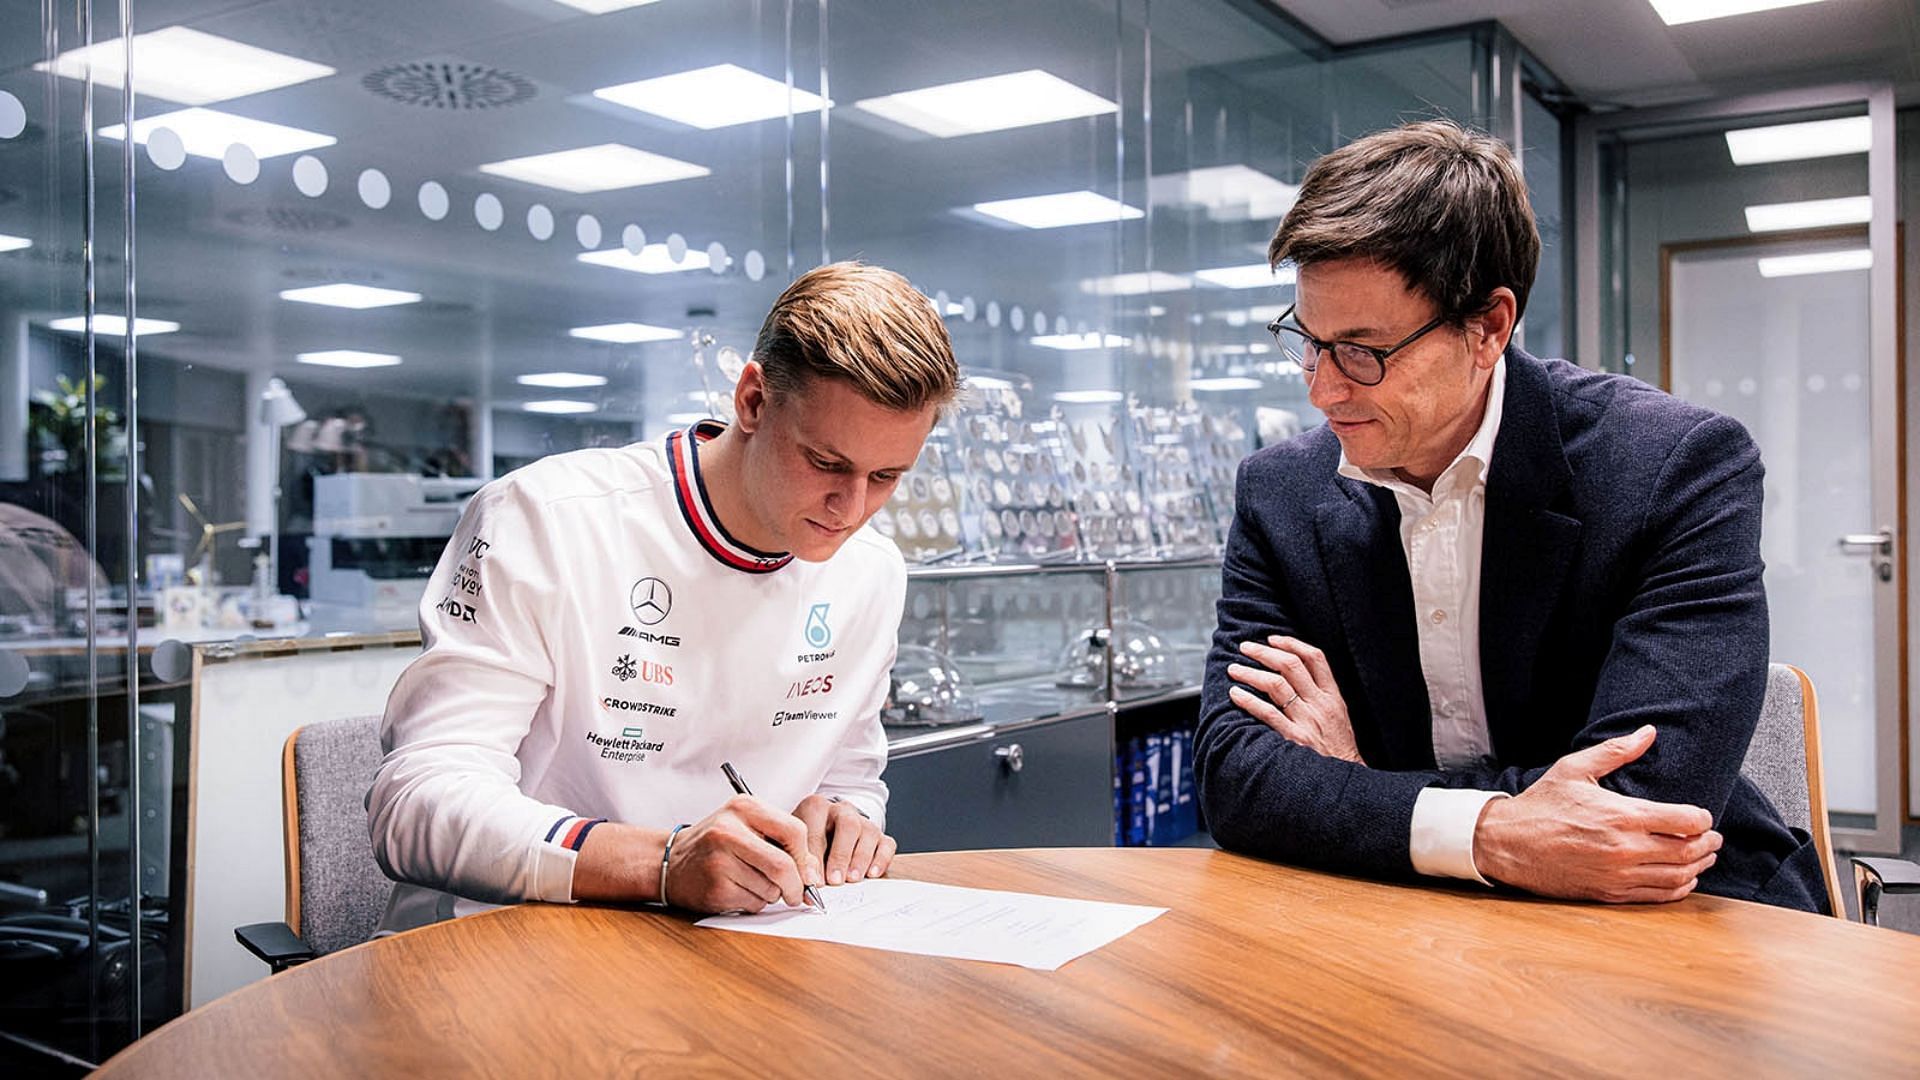 Mick Schumacher with Mercedes team boss Toto Wolff in Brackley (Image via Mercedes content pool)